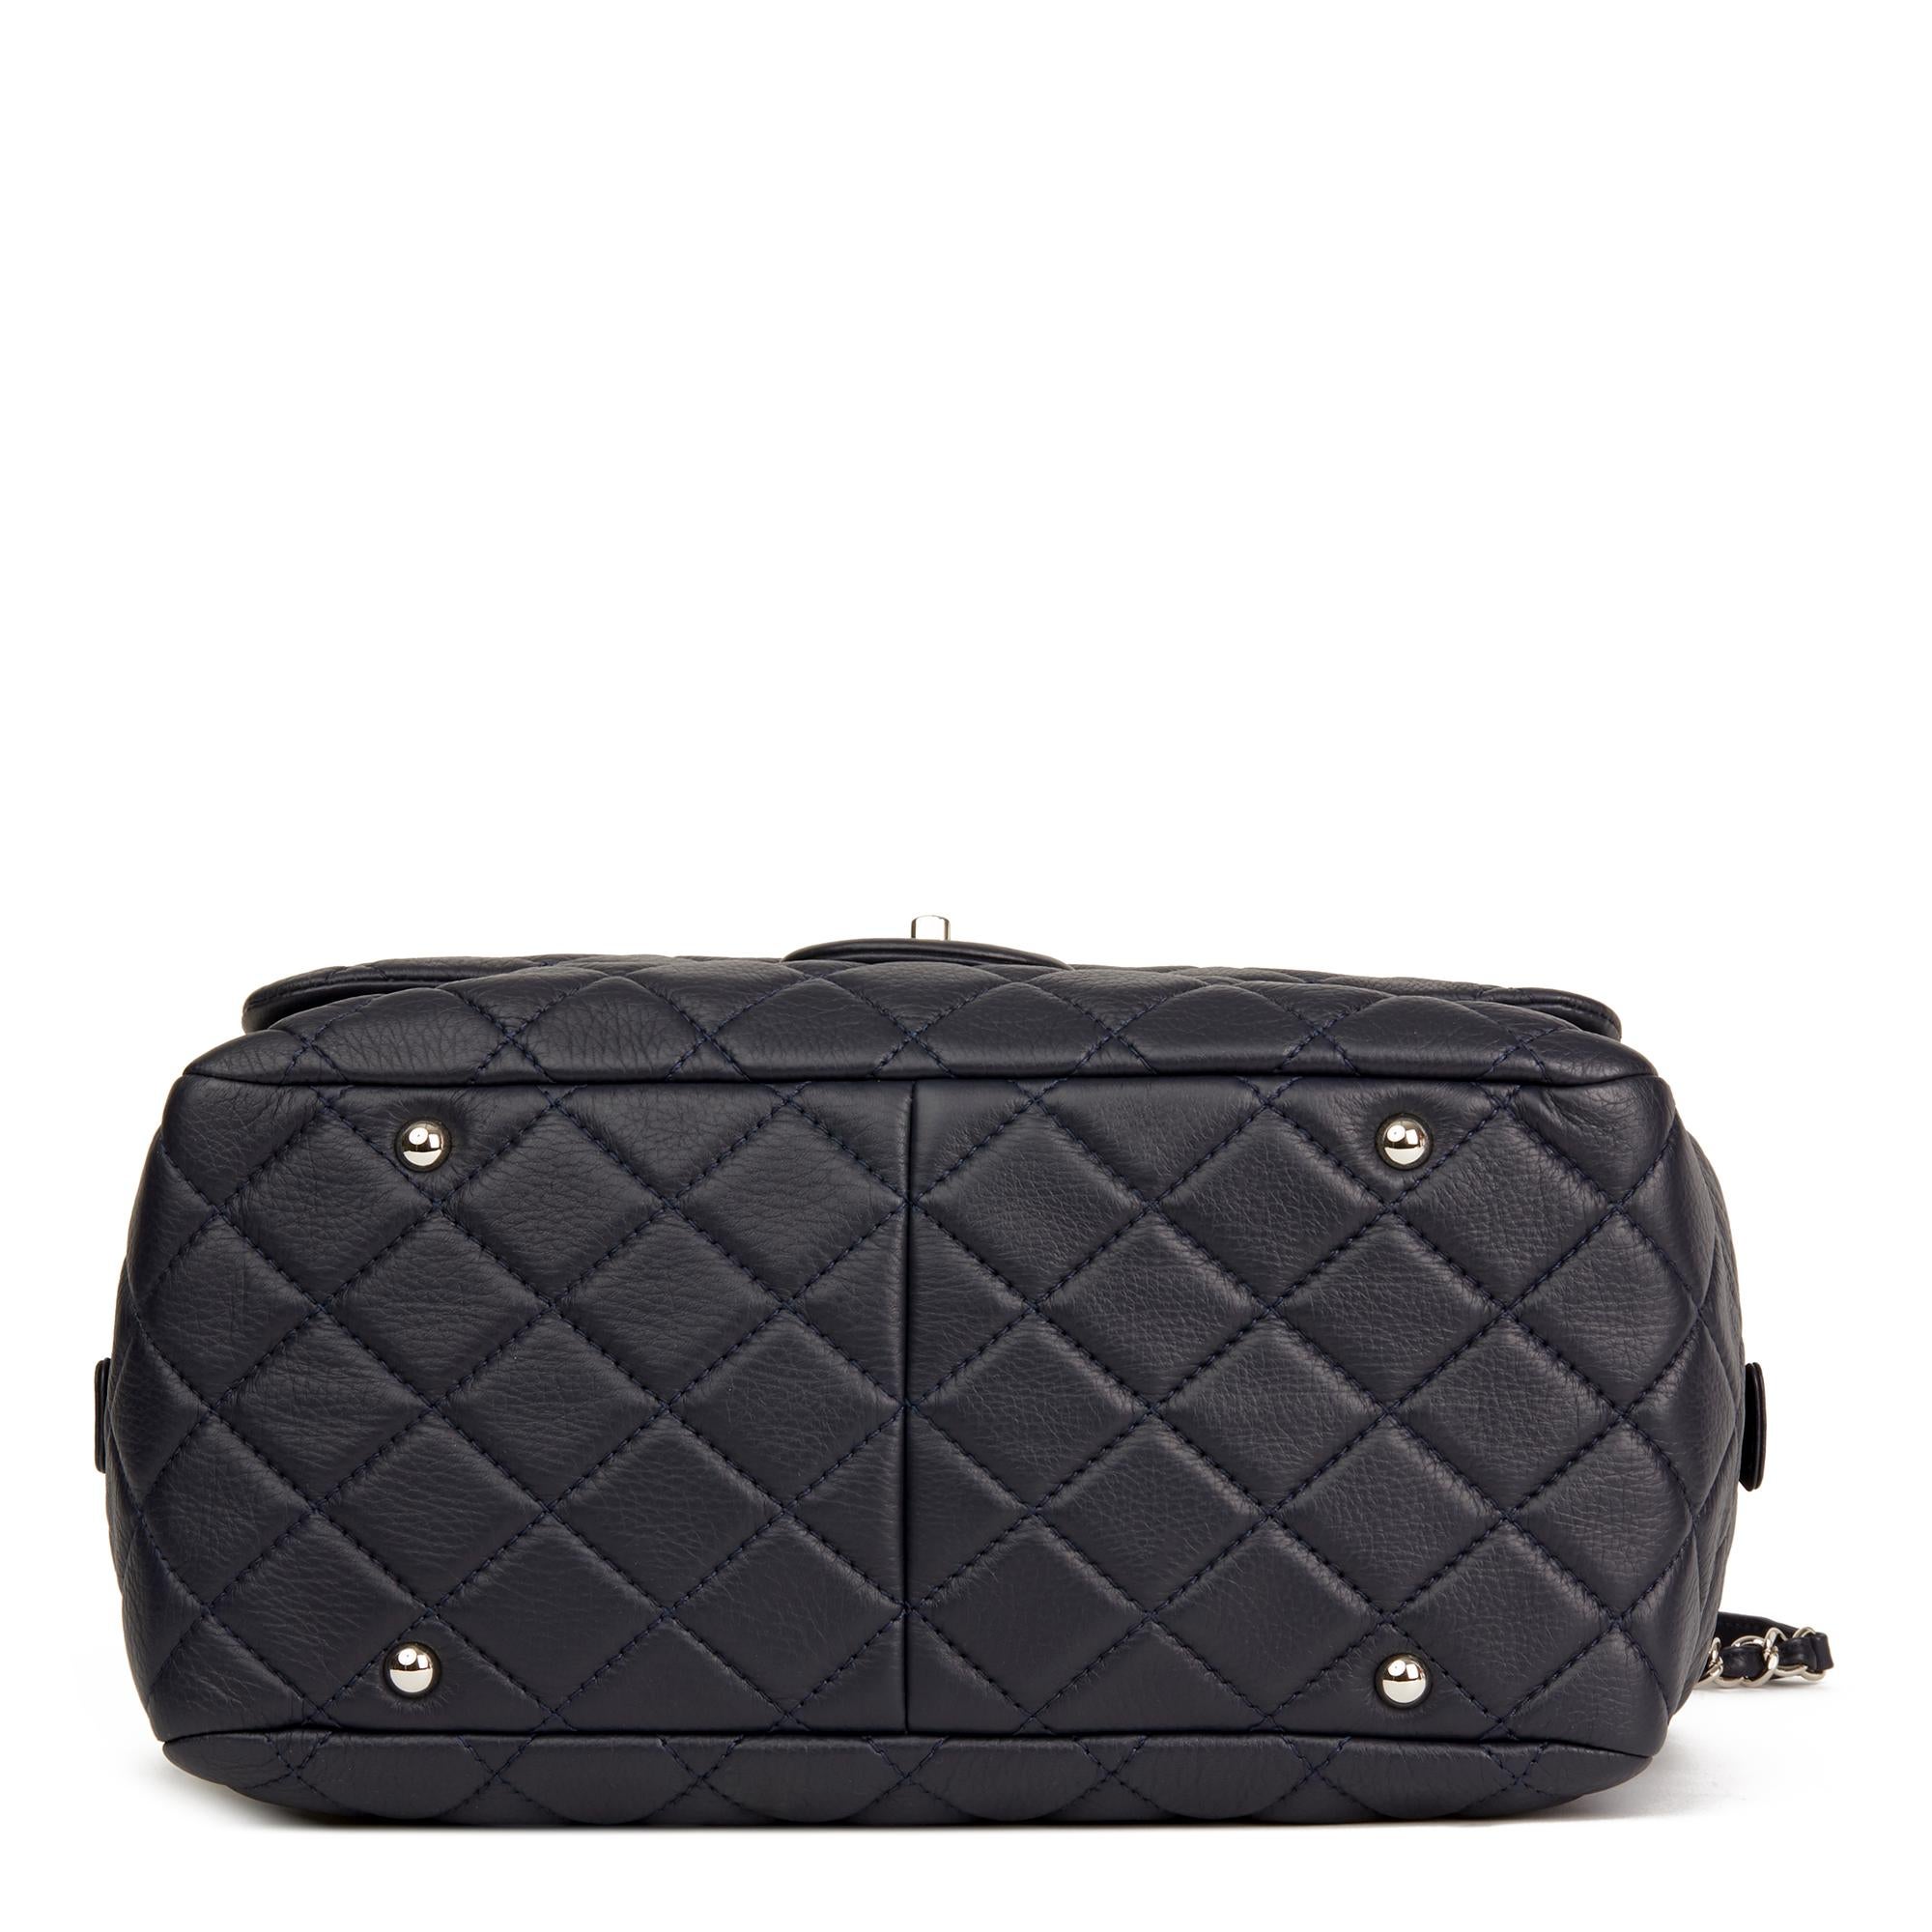 Women's 2016 Chanel Navy Quilted Calfskin Leather Jumbo Classic Camera Bag